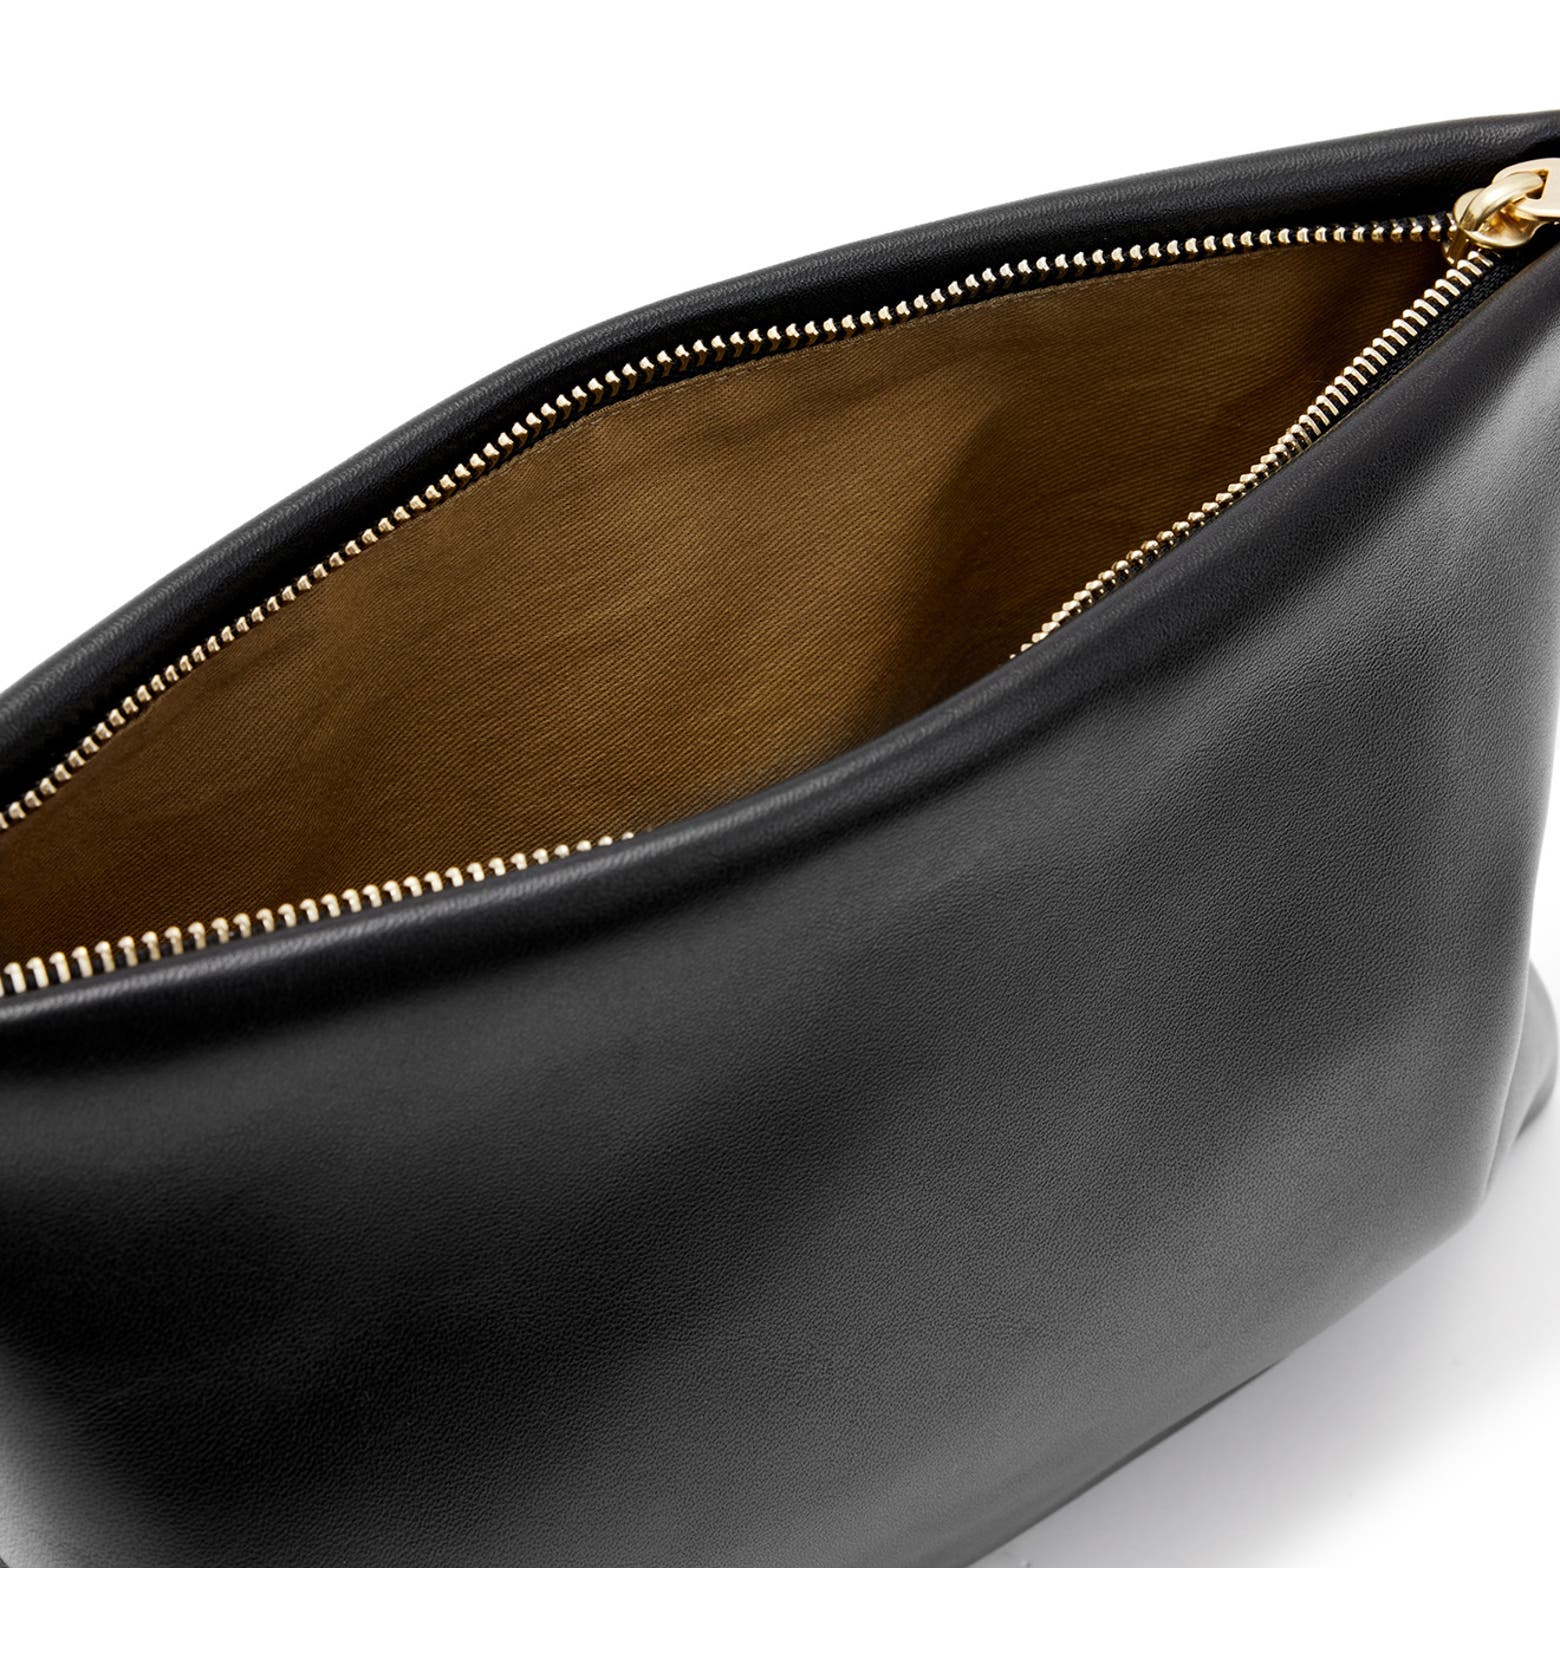 AllSaints Bettina Leather Clutch | Nordstrom